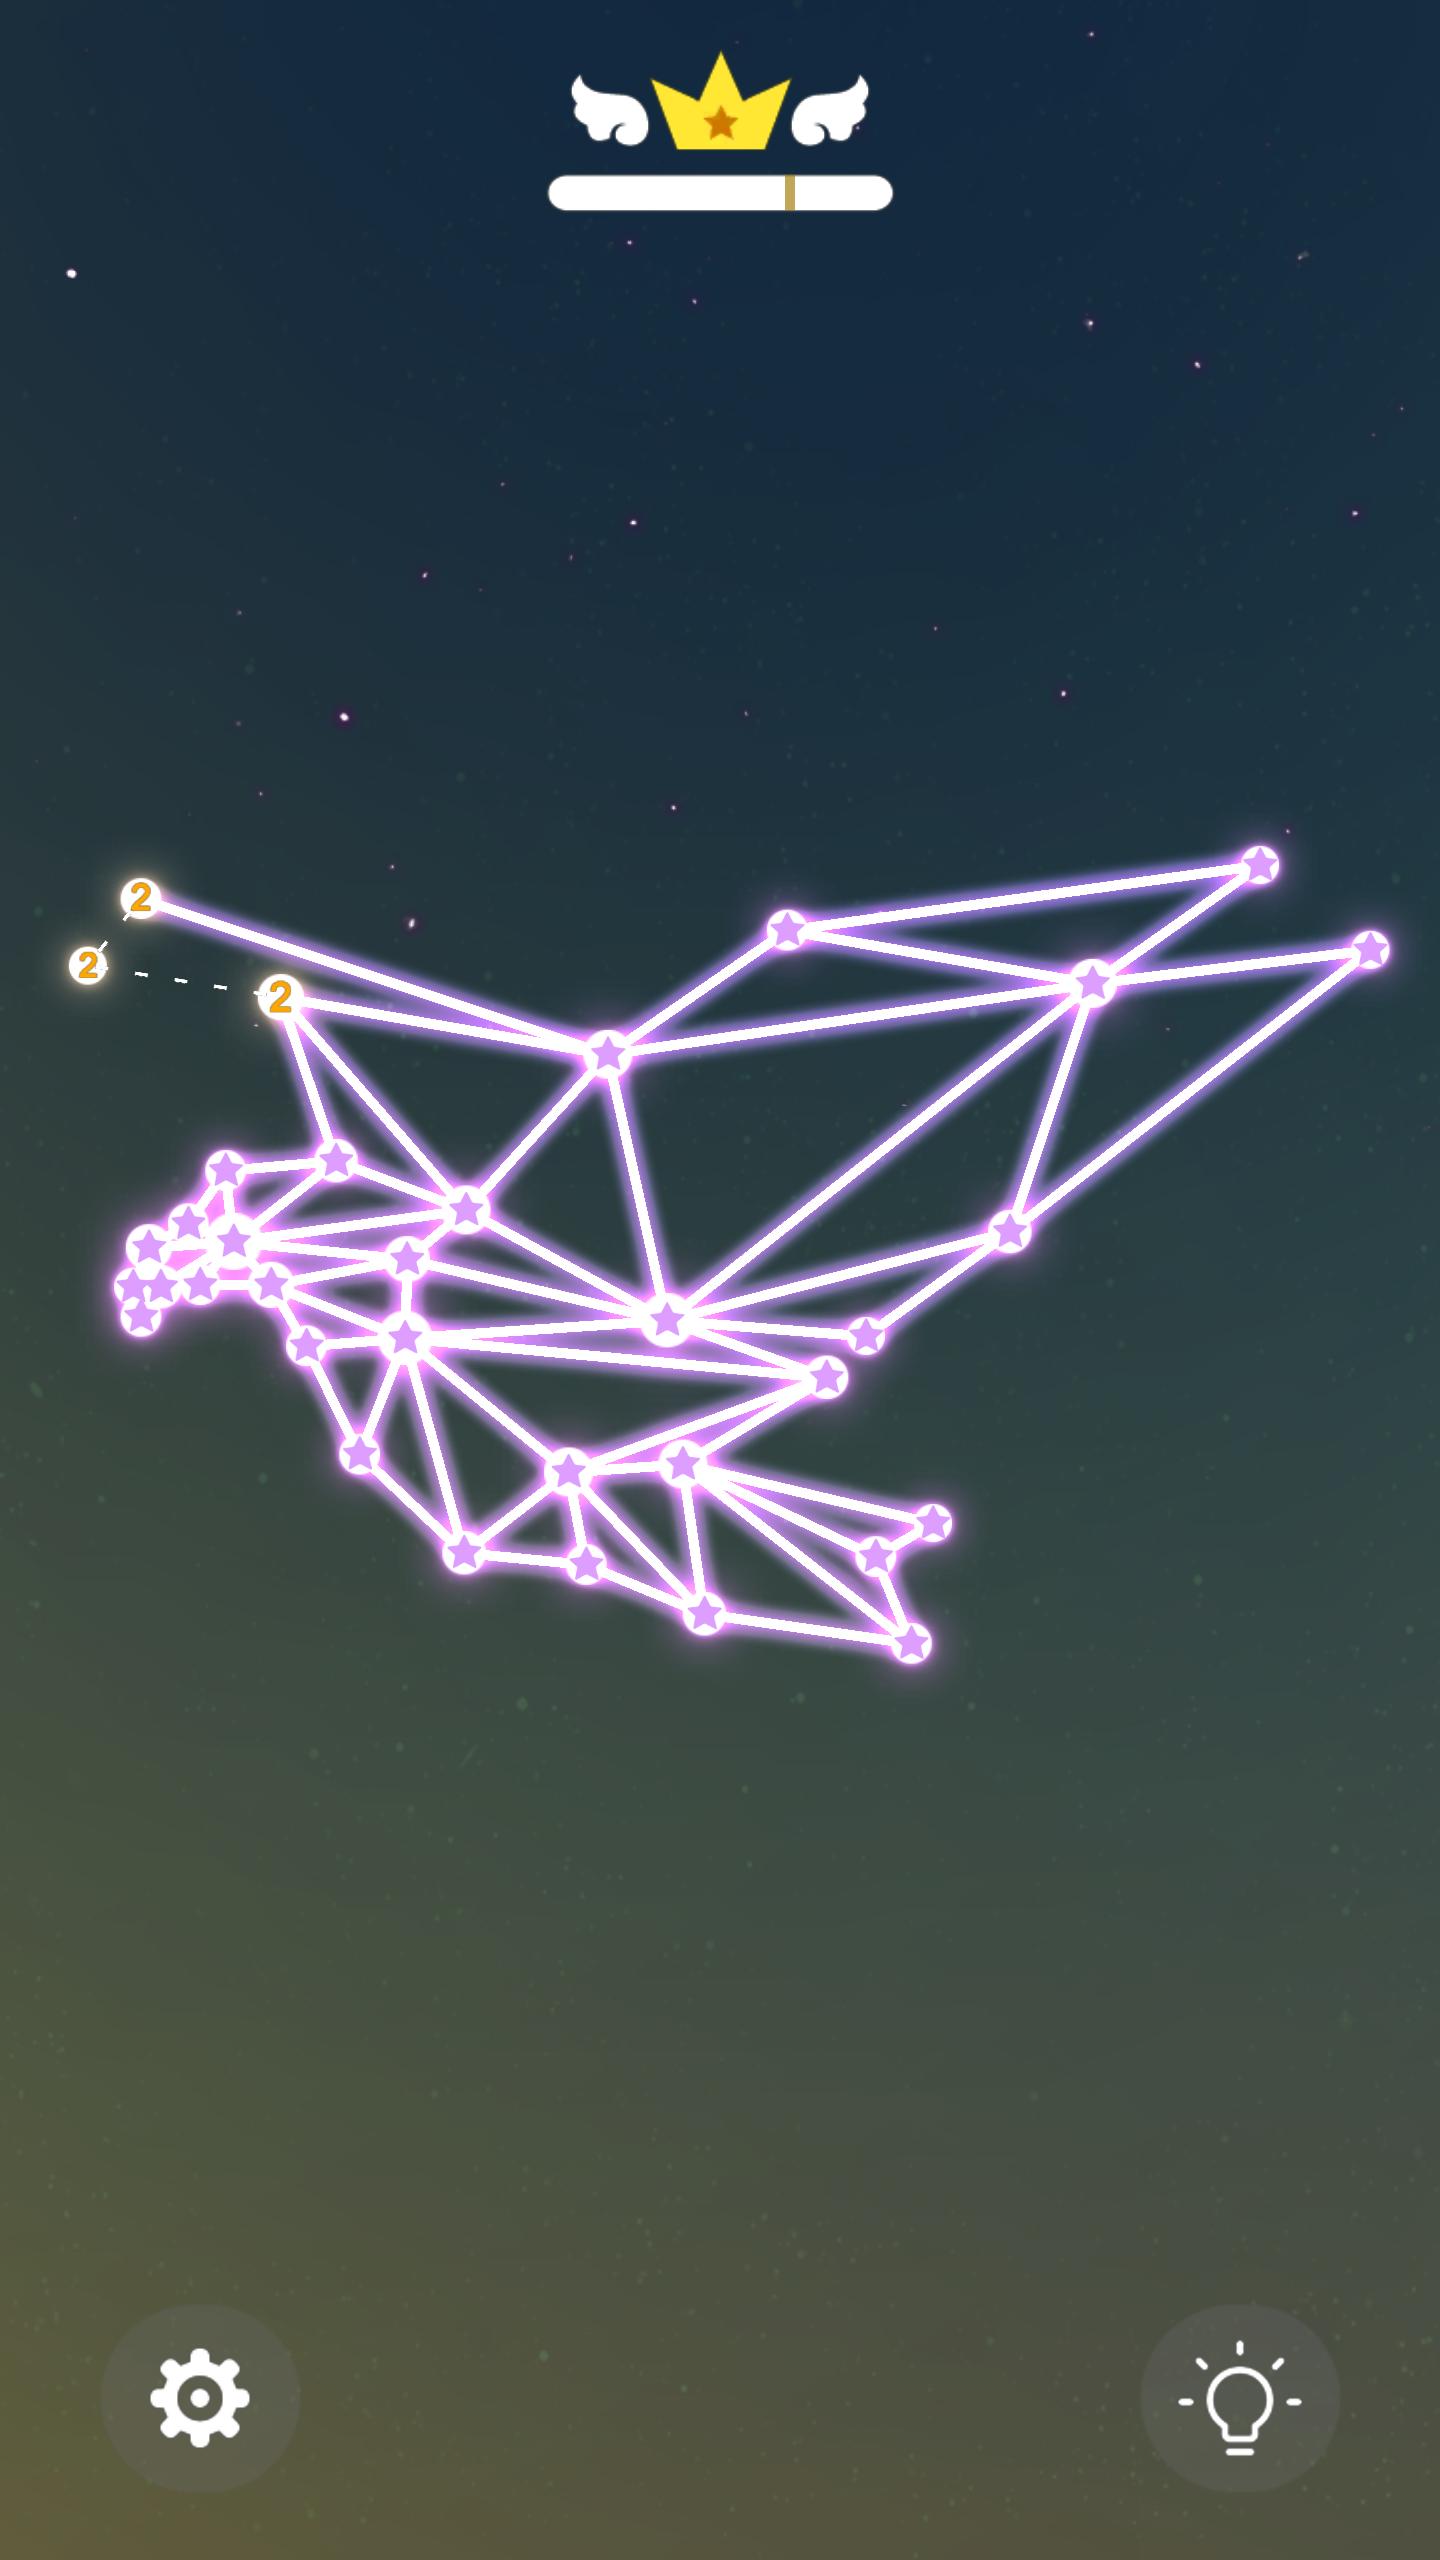 Linepoly Puzzle - Constellation games 1.2.3 Screenshot 3